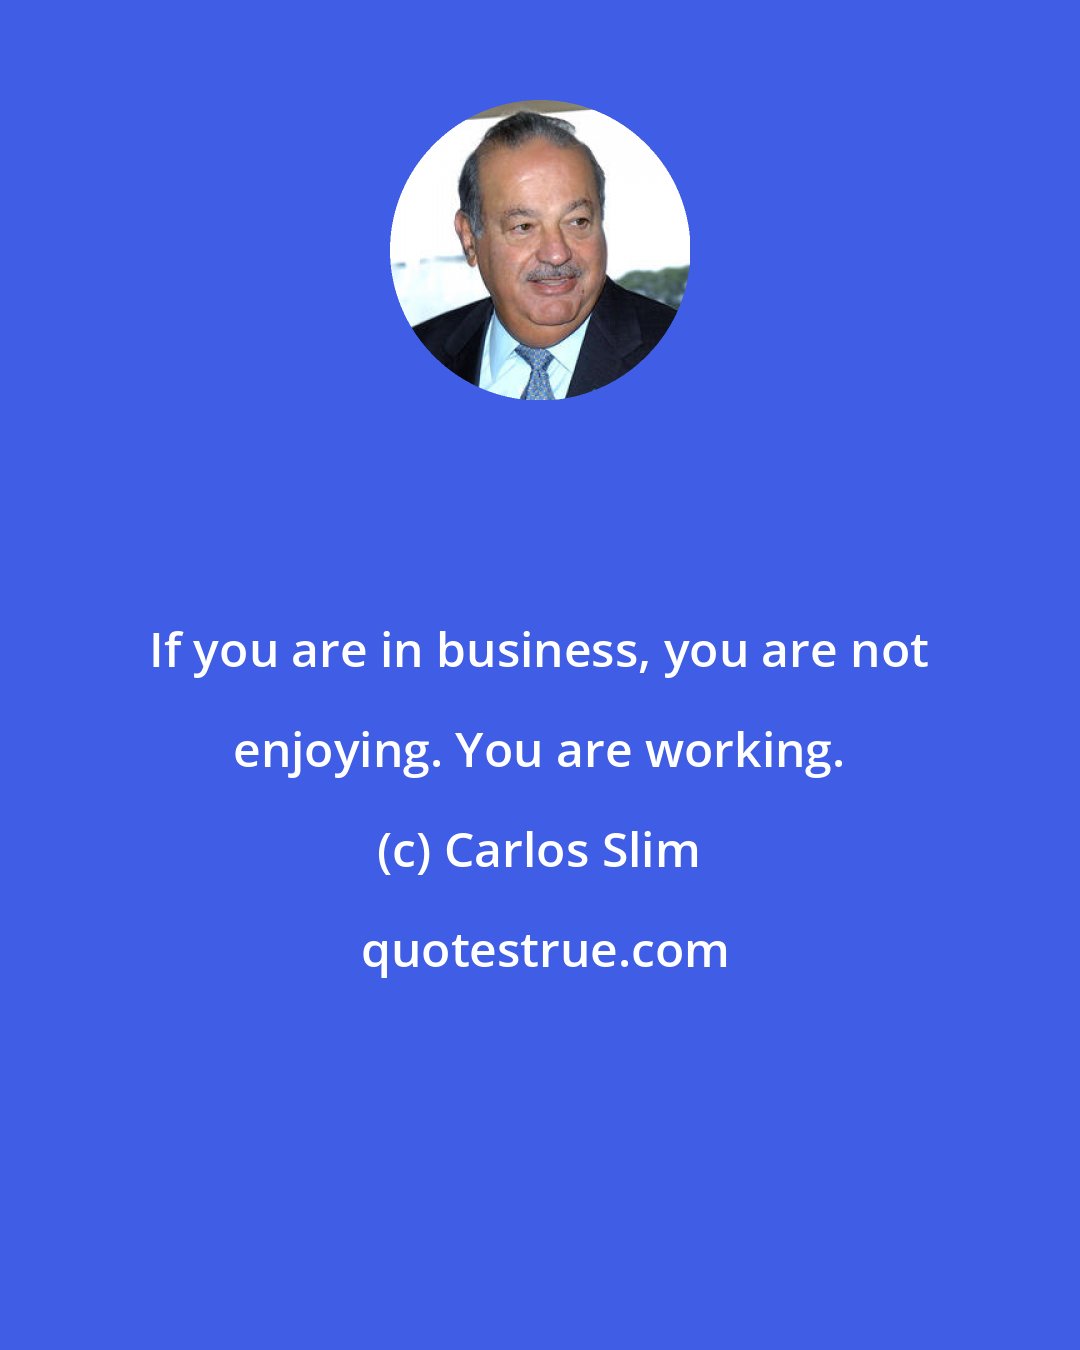 Carlos Slim: If you are in business, you are not enjoying. You are working.